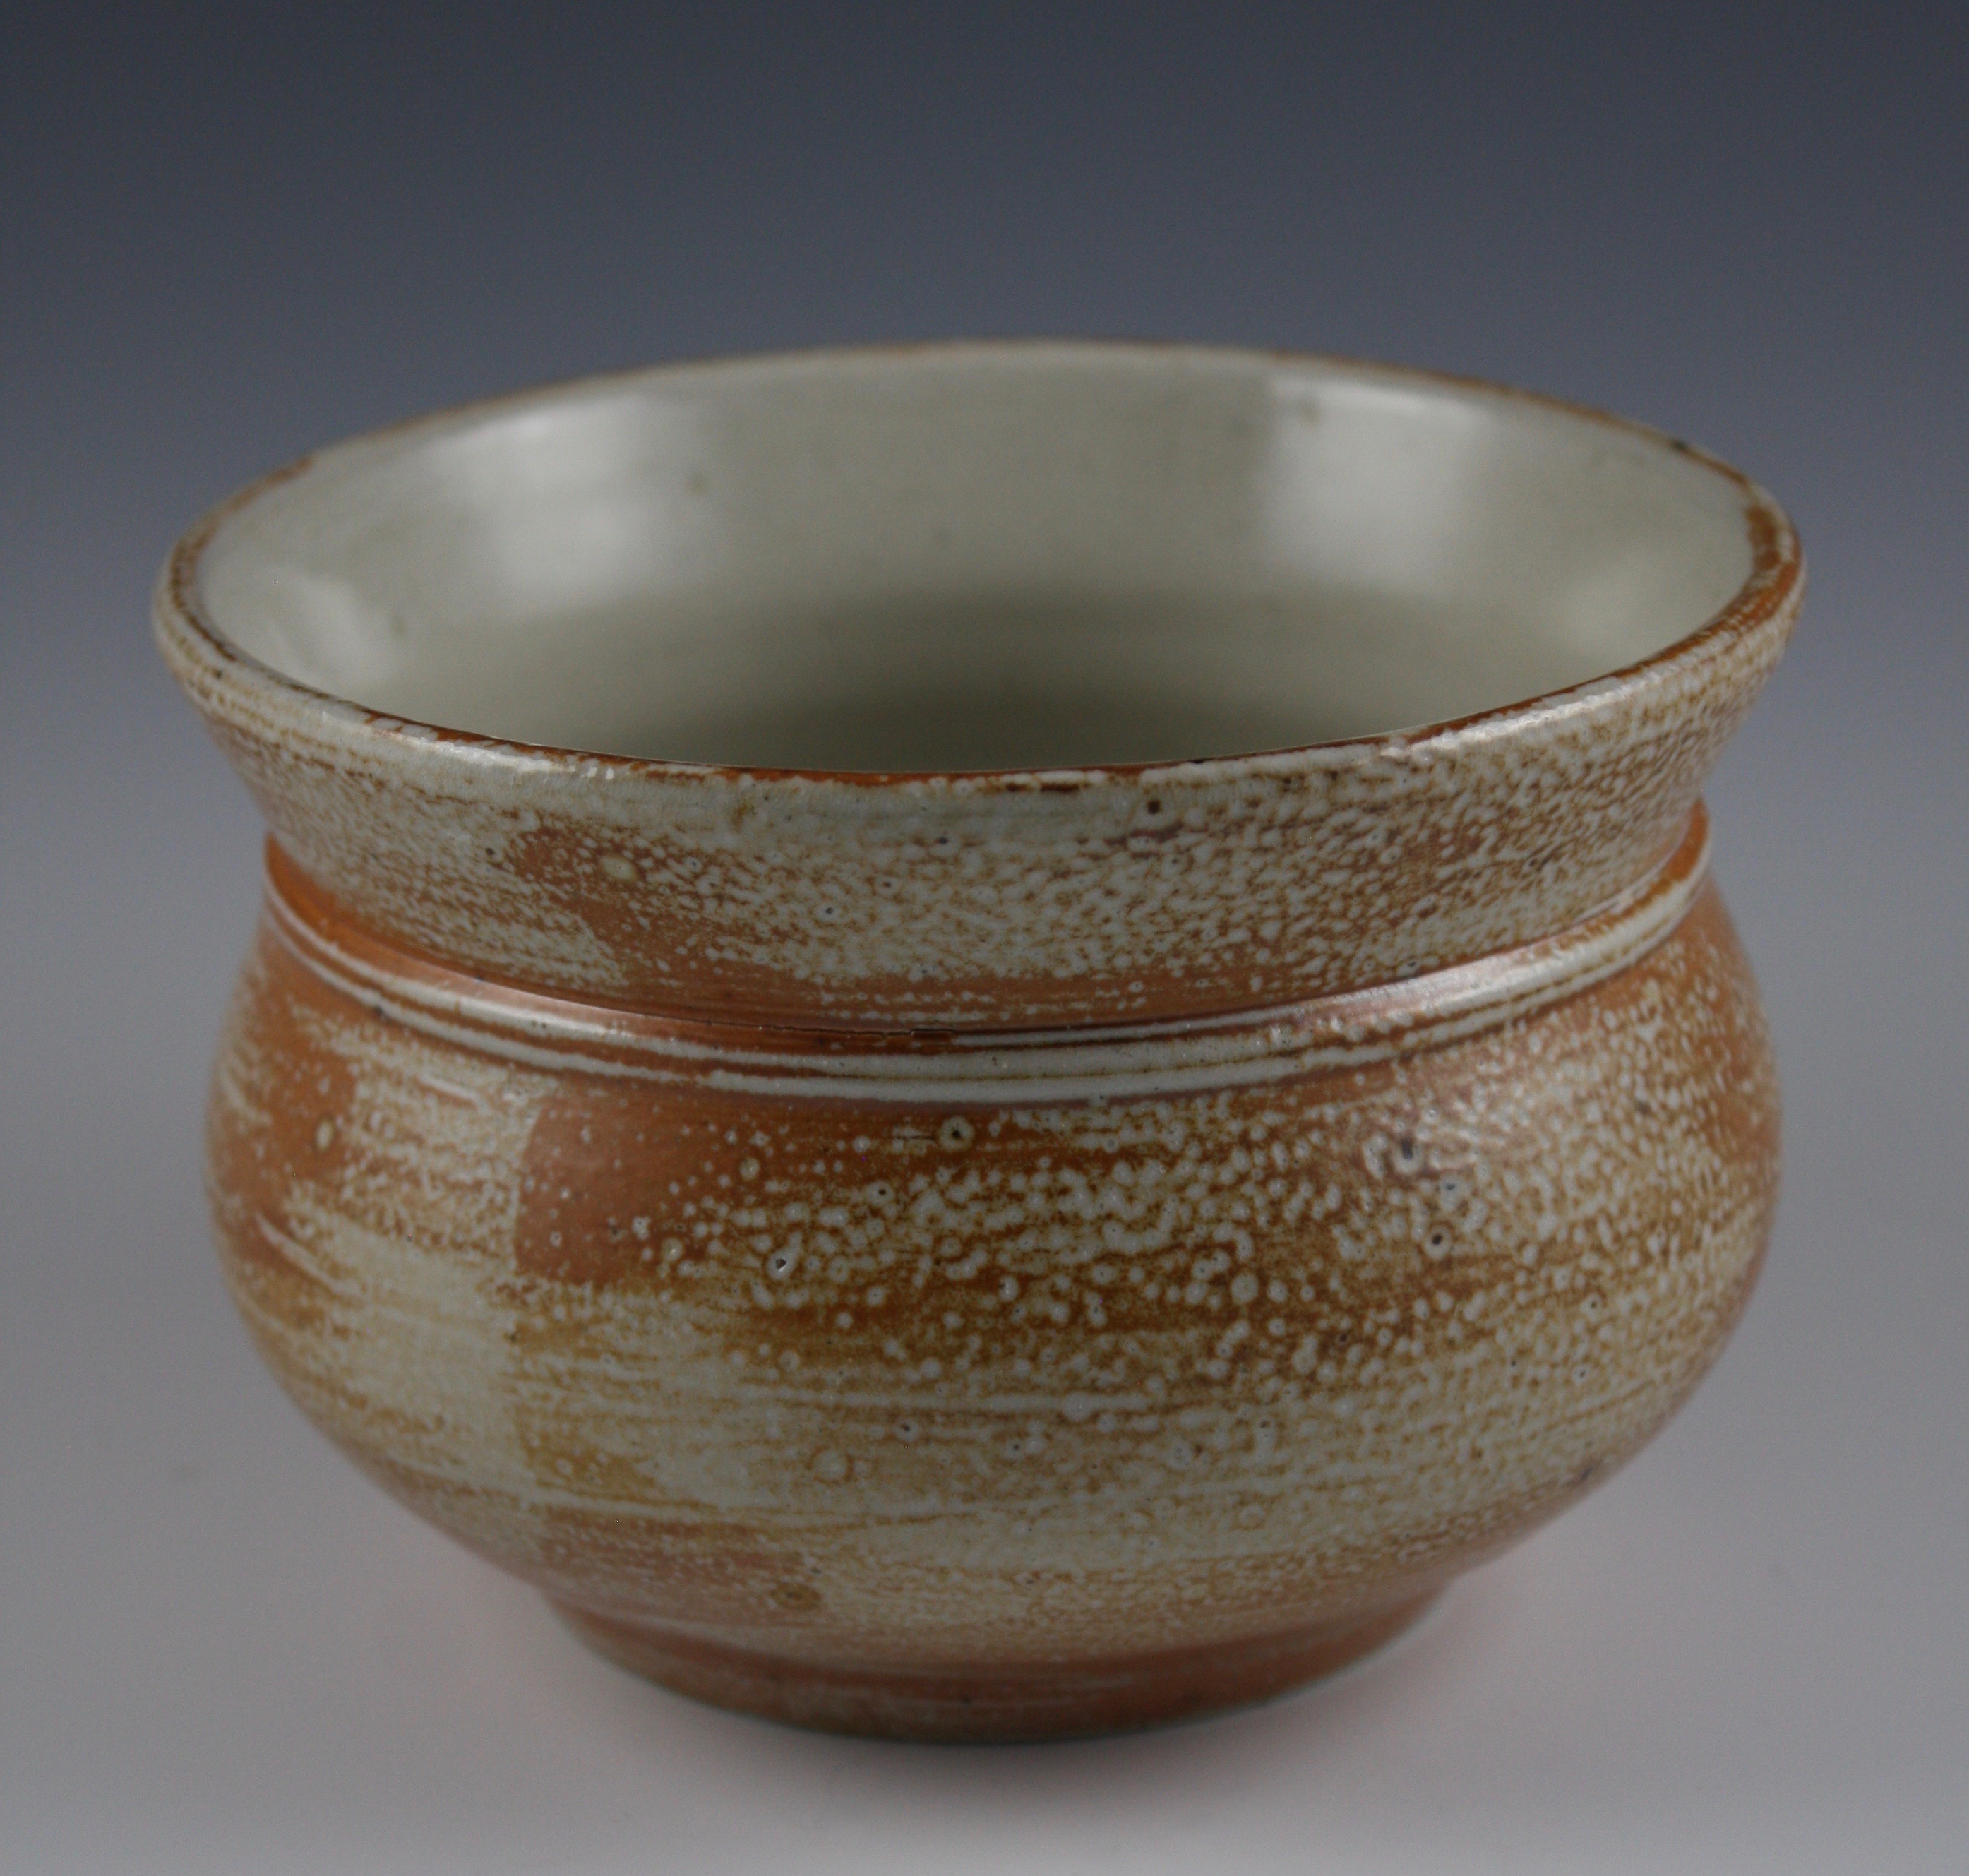 Spittoon-Shaped Bowl #28